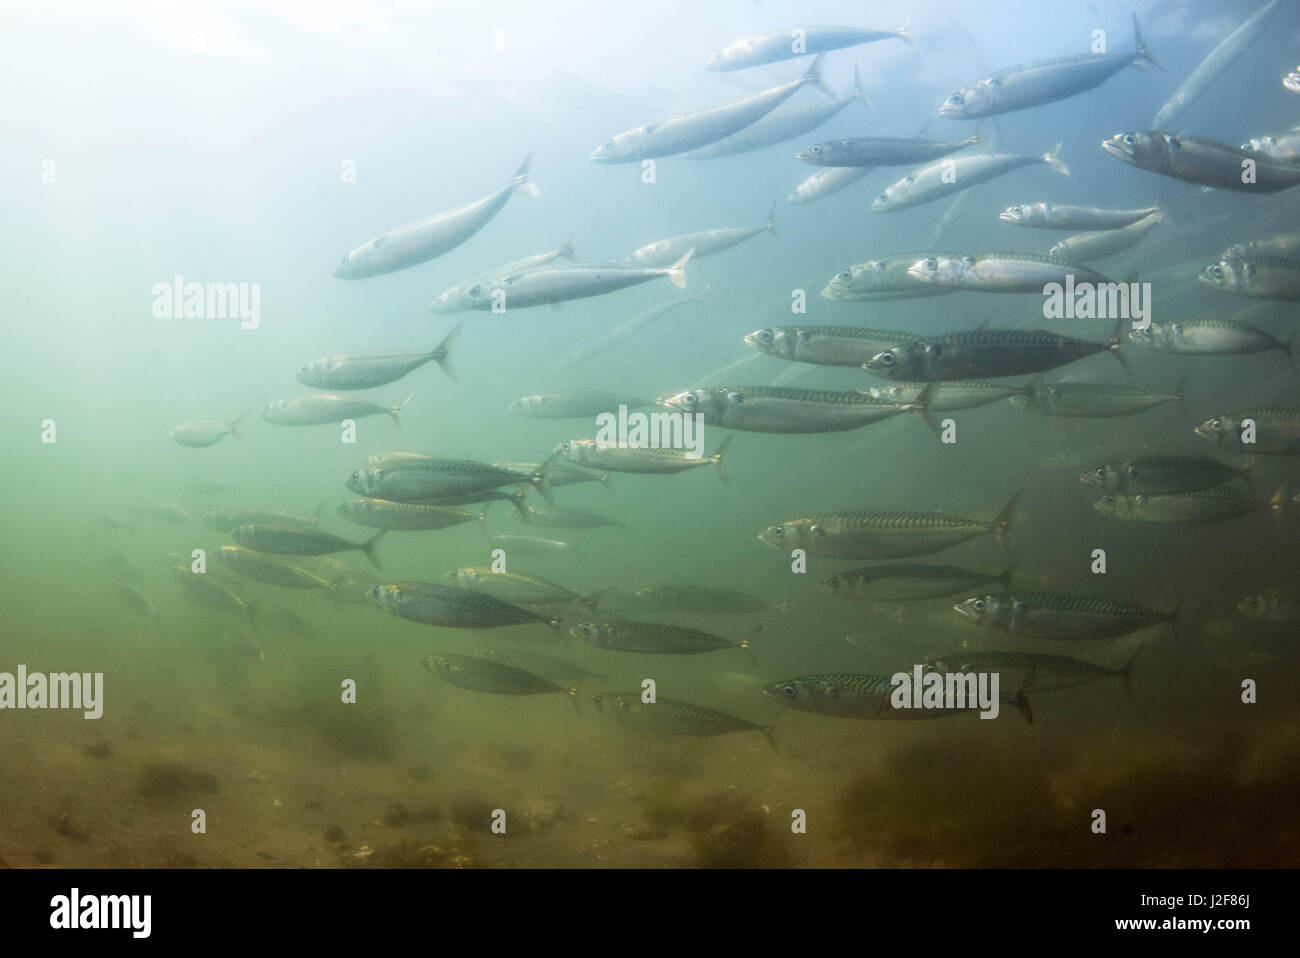 School of mackerels, an important species for commercial fisheries Stock Photo